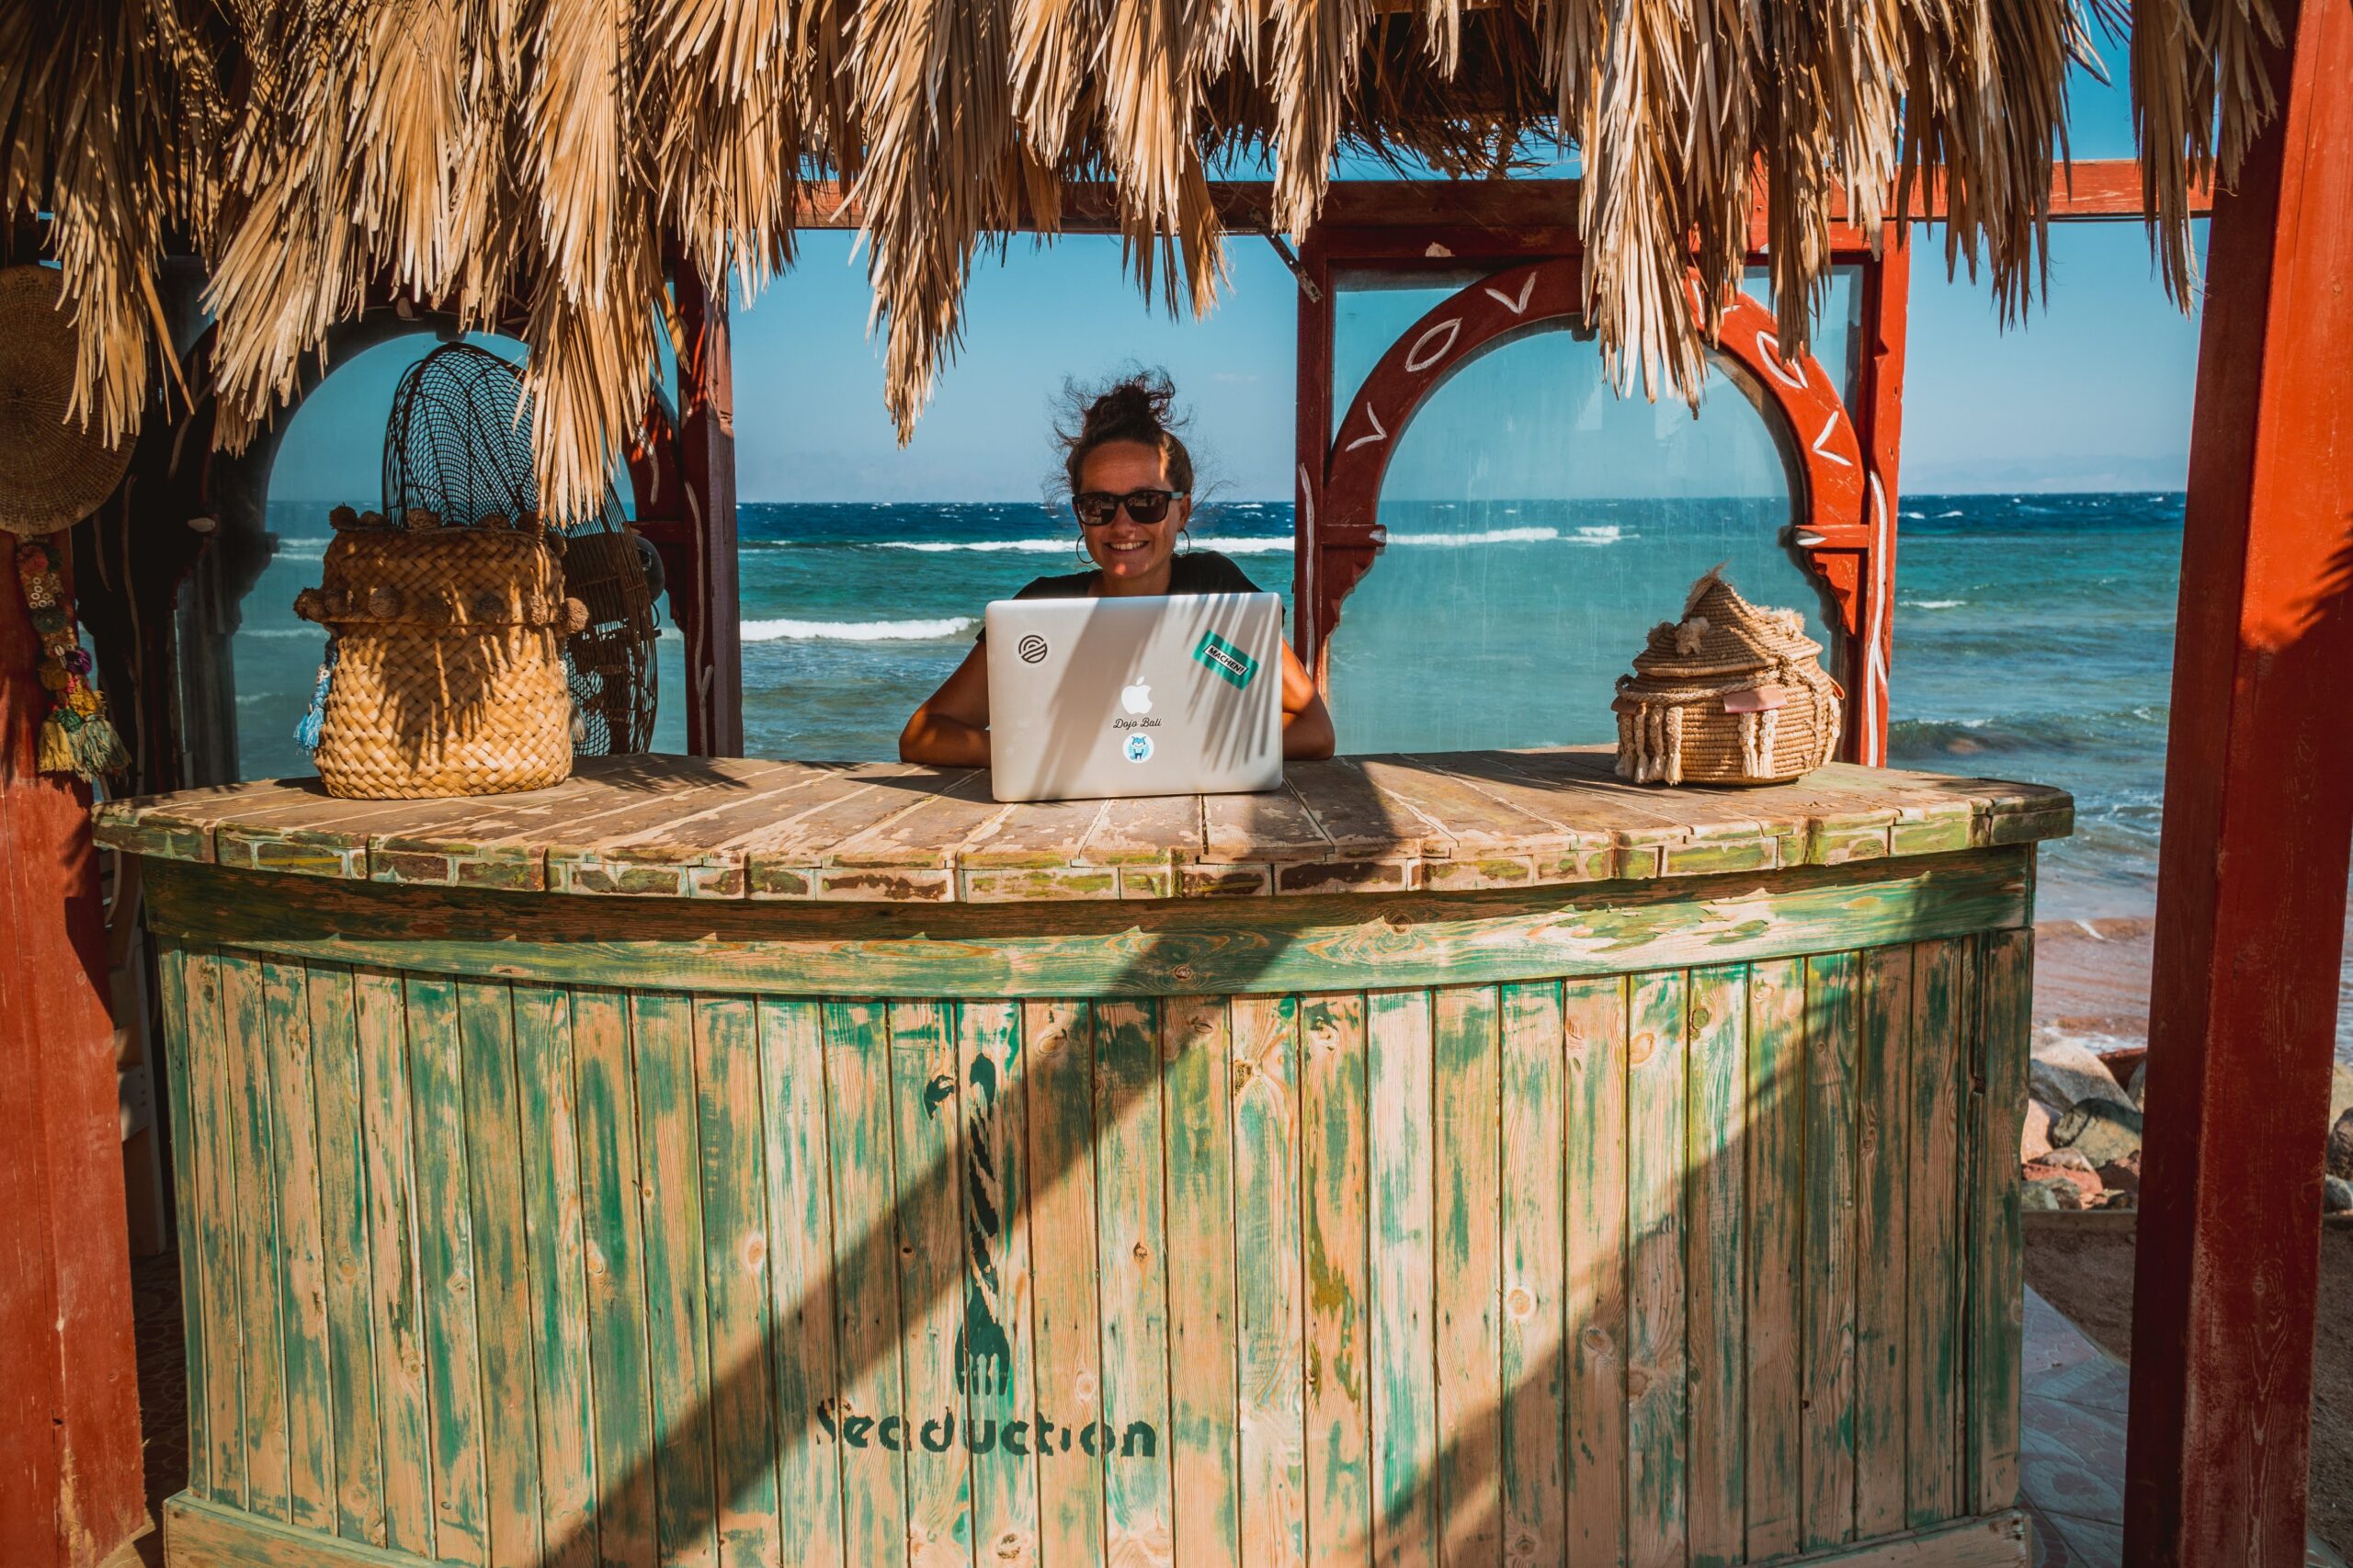 Make Money Online as a Digital Nomad | Austin and Monica